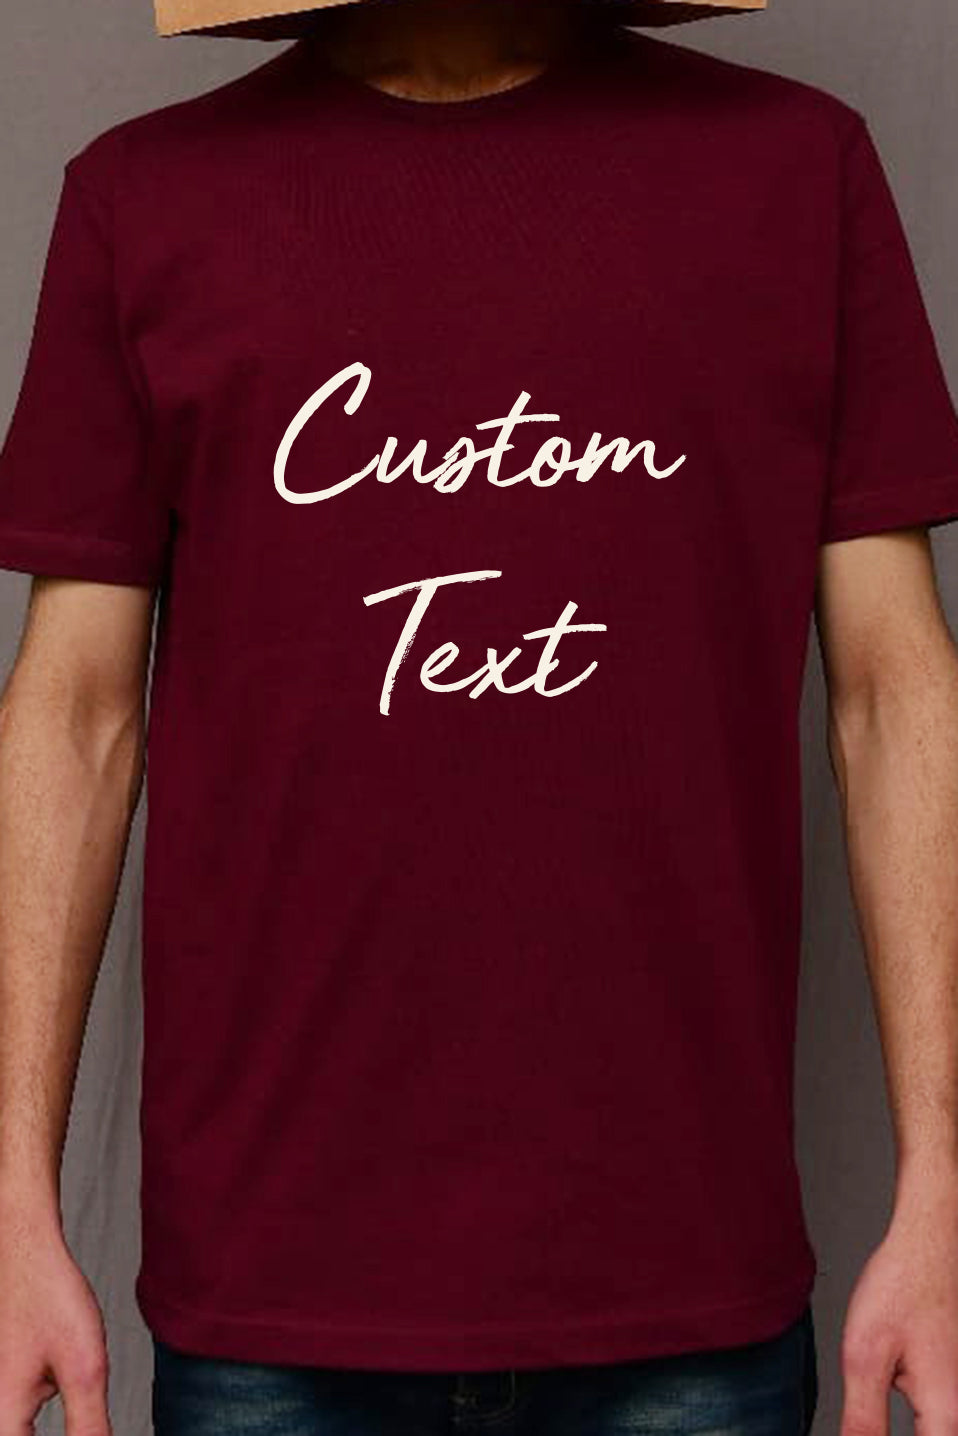 Custom Maroon Uni-sex Shirt with Personalized Text Printing